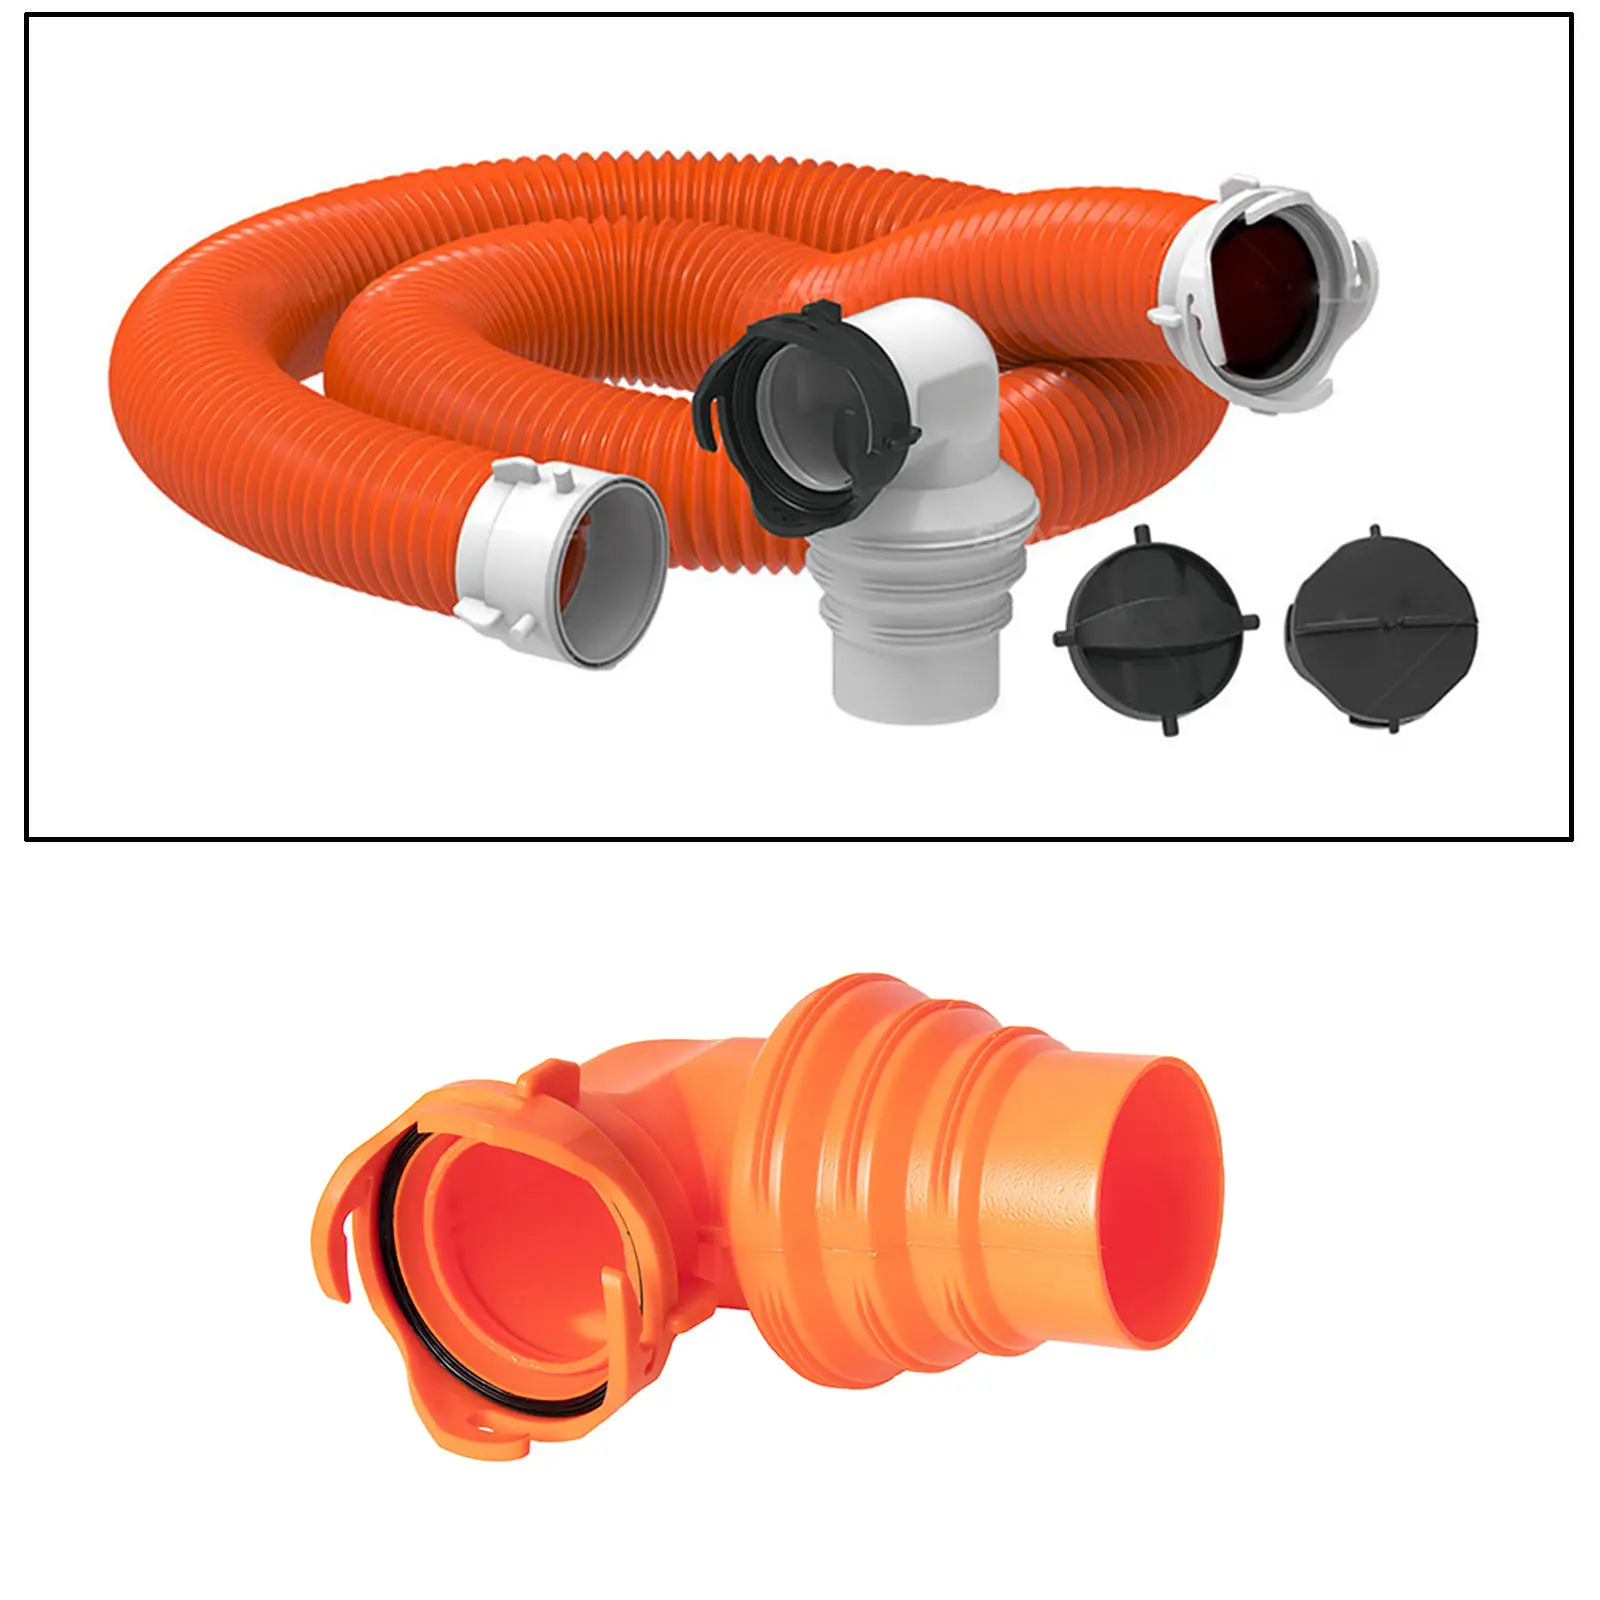 90 Degree RV Sewer Hose Swivel Elbow Fitting Adapter for 3